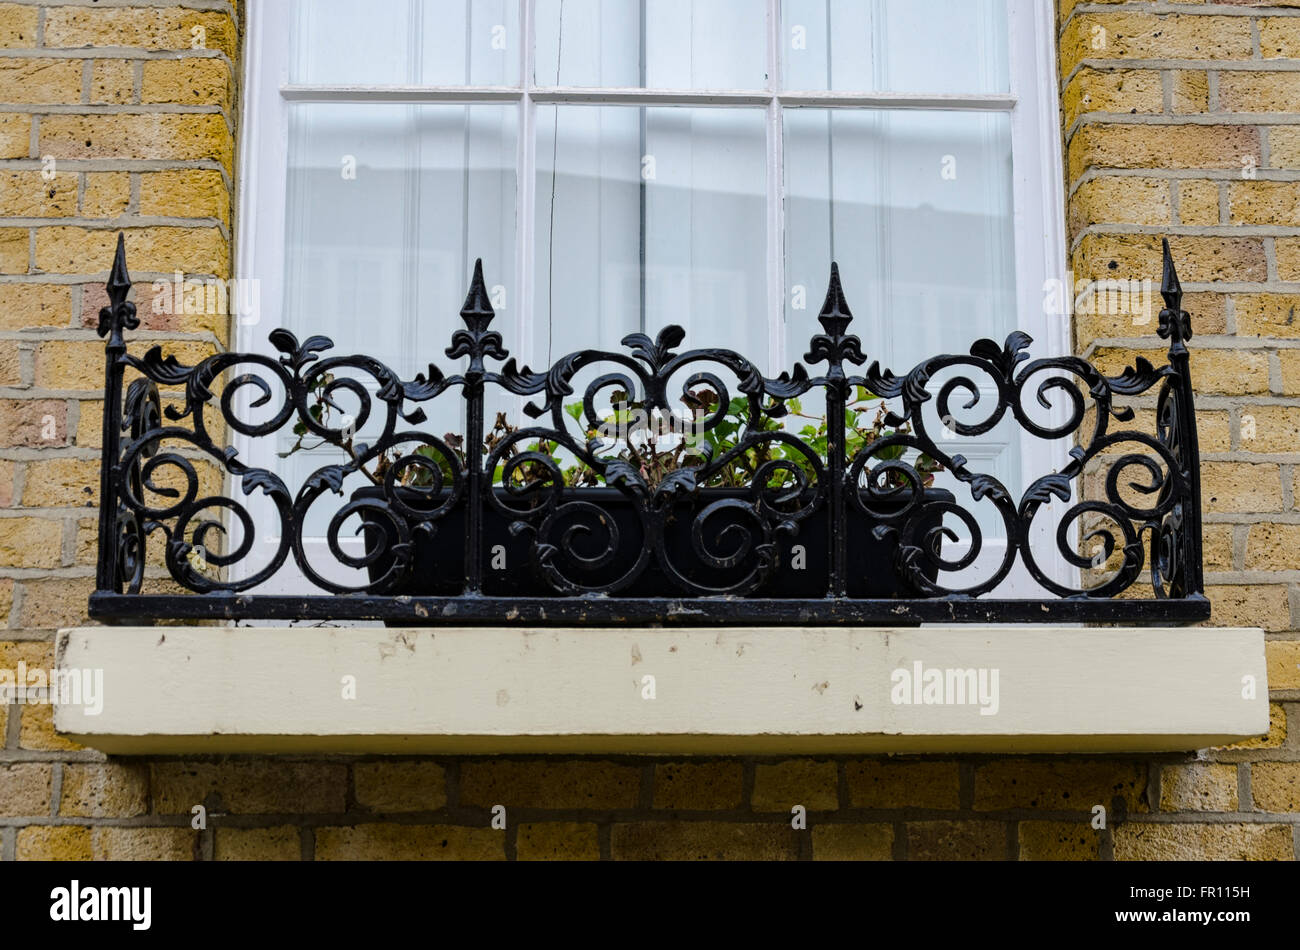 An ornate window ledge with iron railings and a flower box. Stock Photo